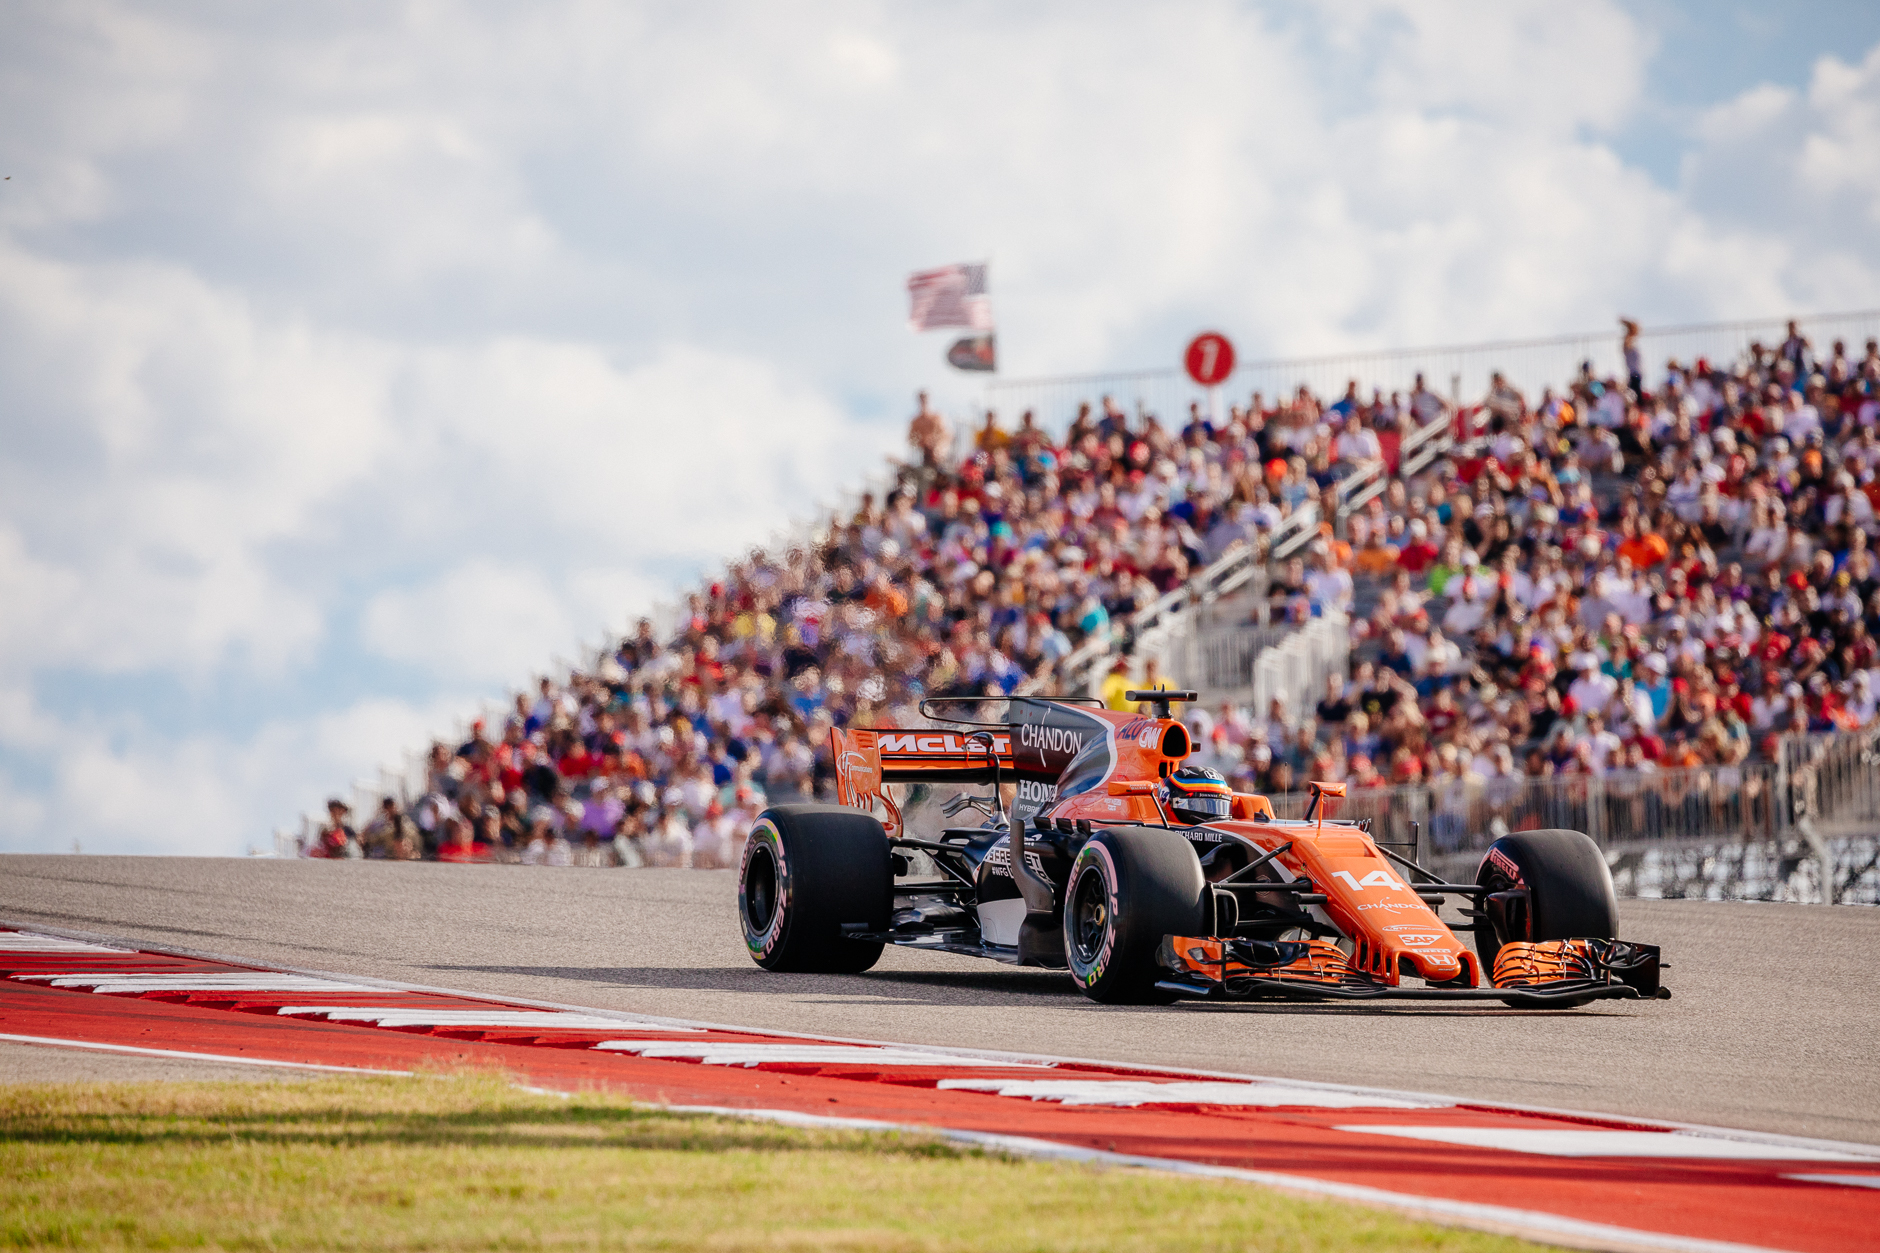 McLaren Honda's Fernando Alonso with the turn 1 grandstand in the background.